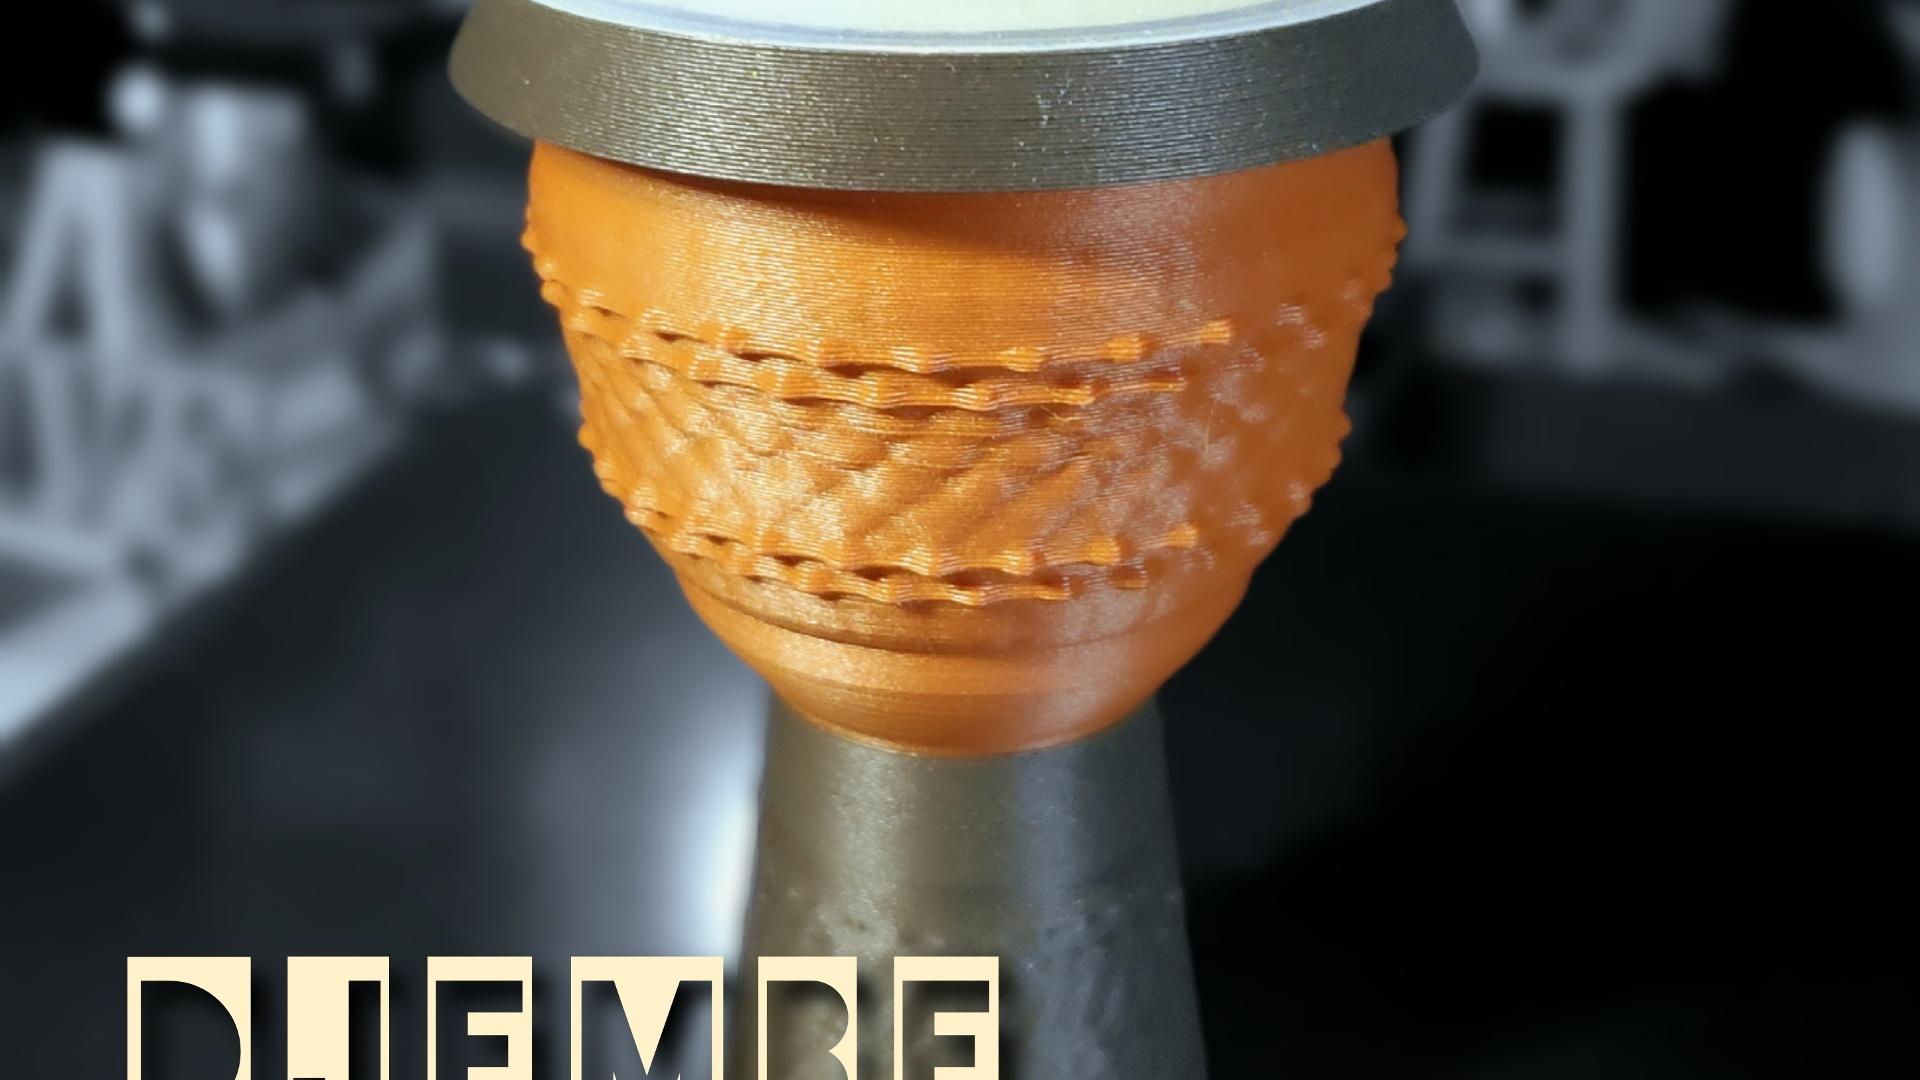 Miniature Print-In-Place 4" Djembe Drum with Decorative Carving - 4" Djembe drum using Bone PLA for the drumhead with red and dark wood PLAs for the body.  - 3d model